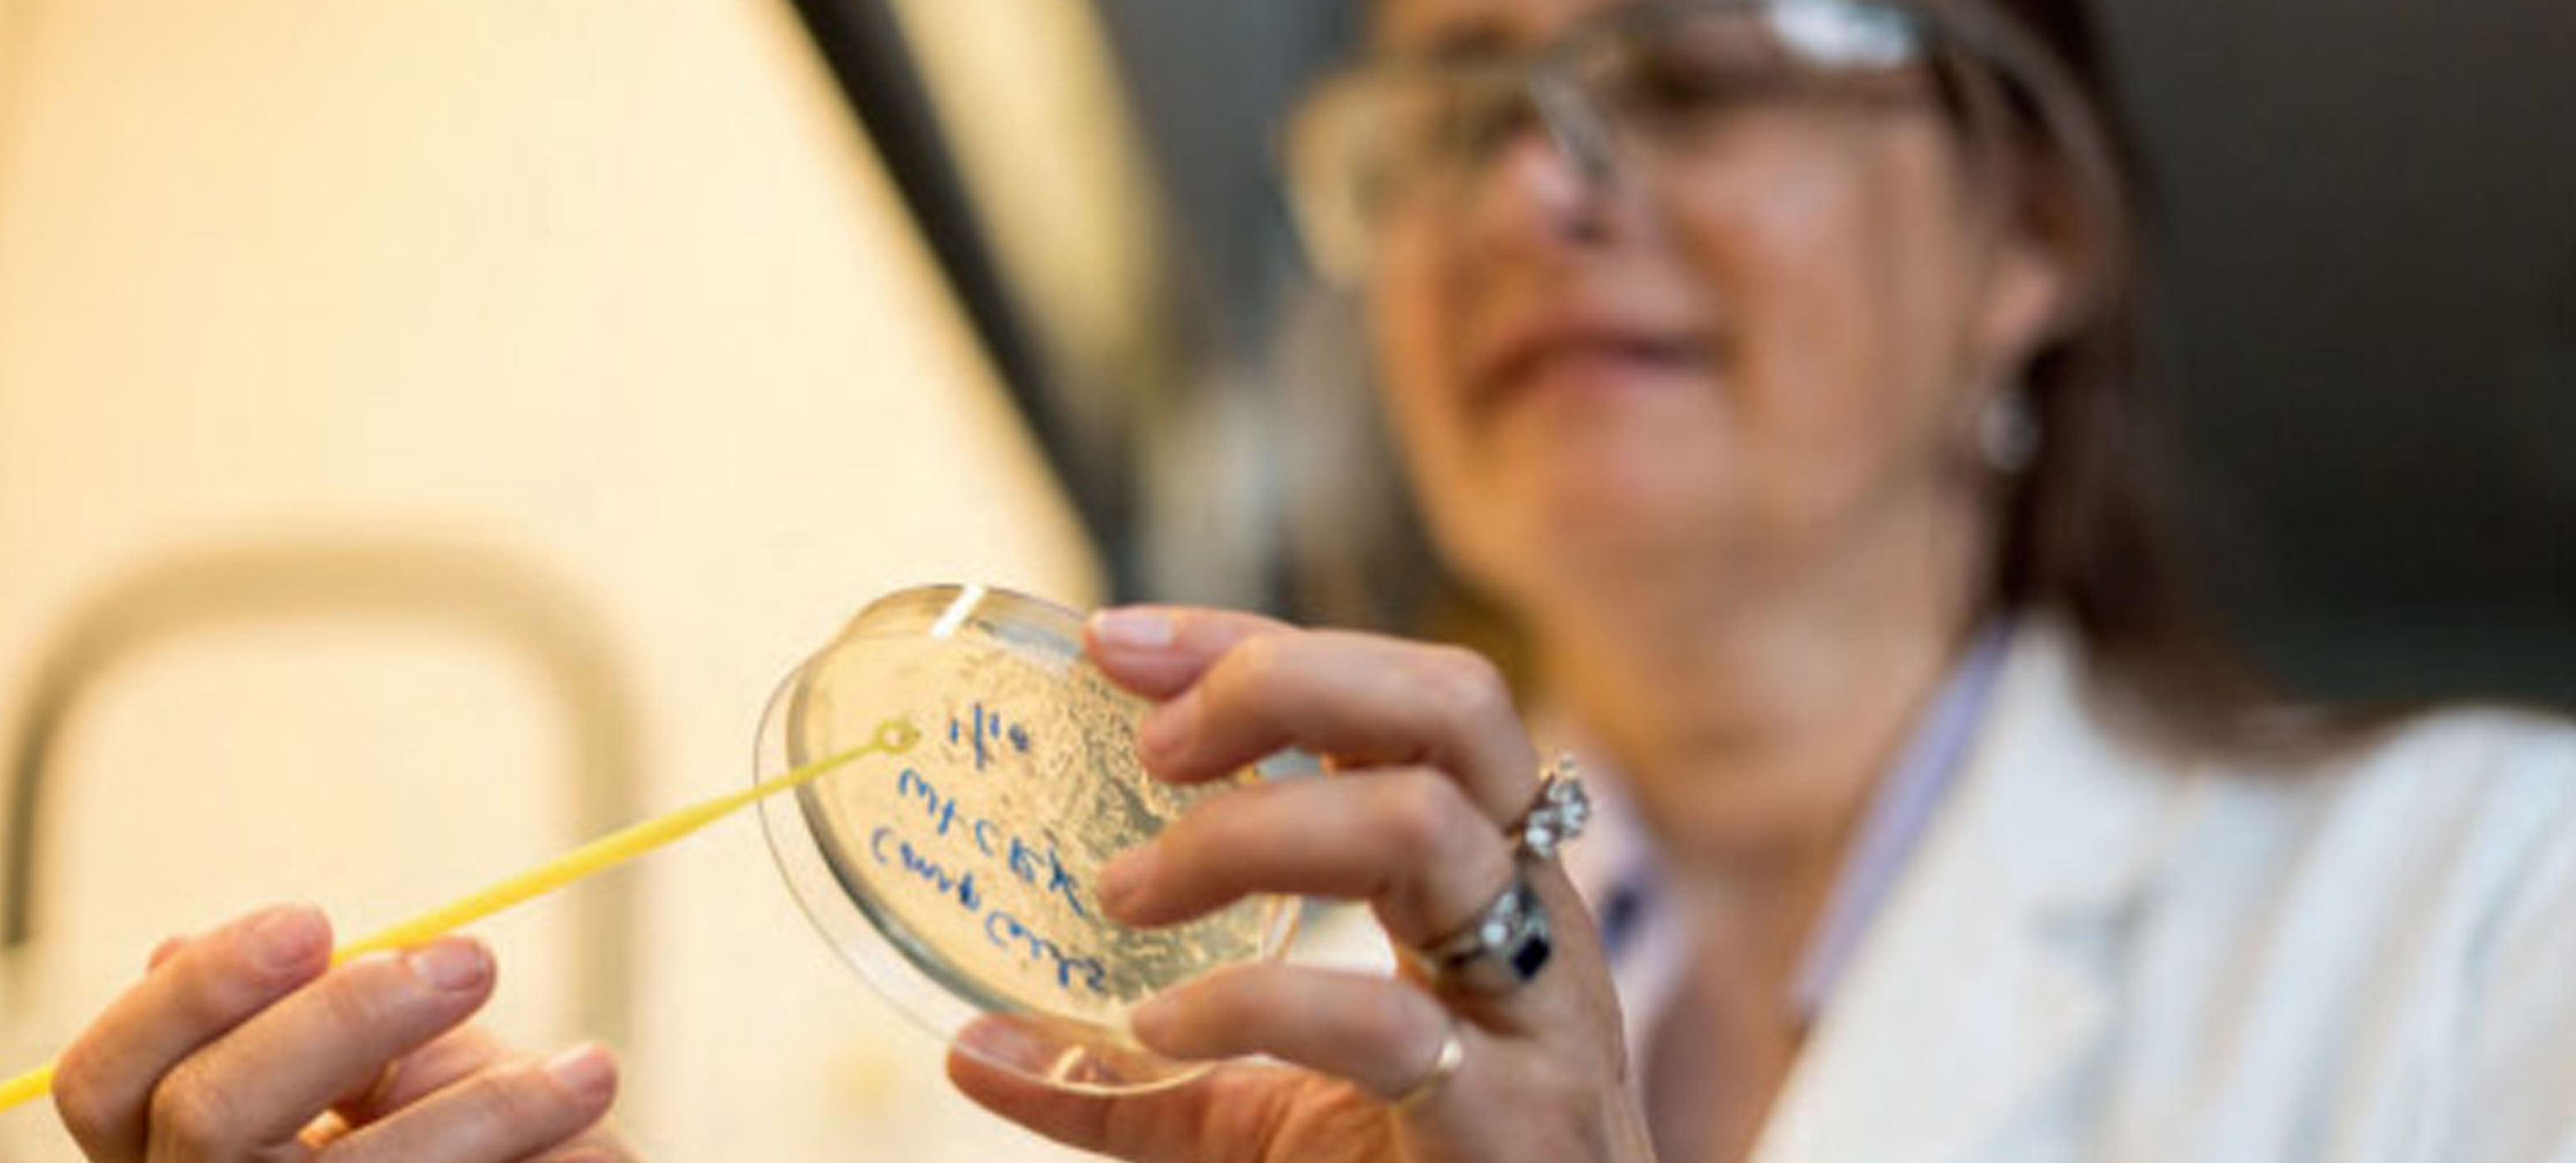 A lab assistant holding a petri dish